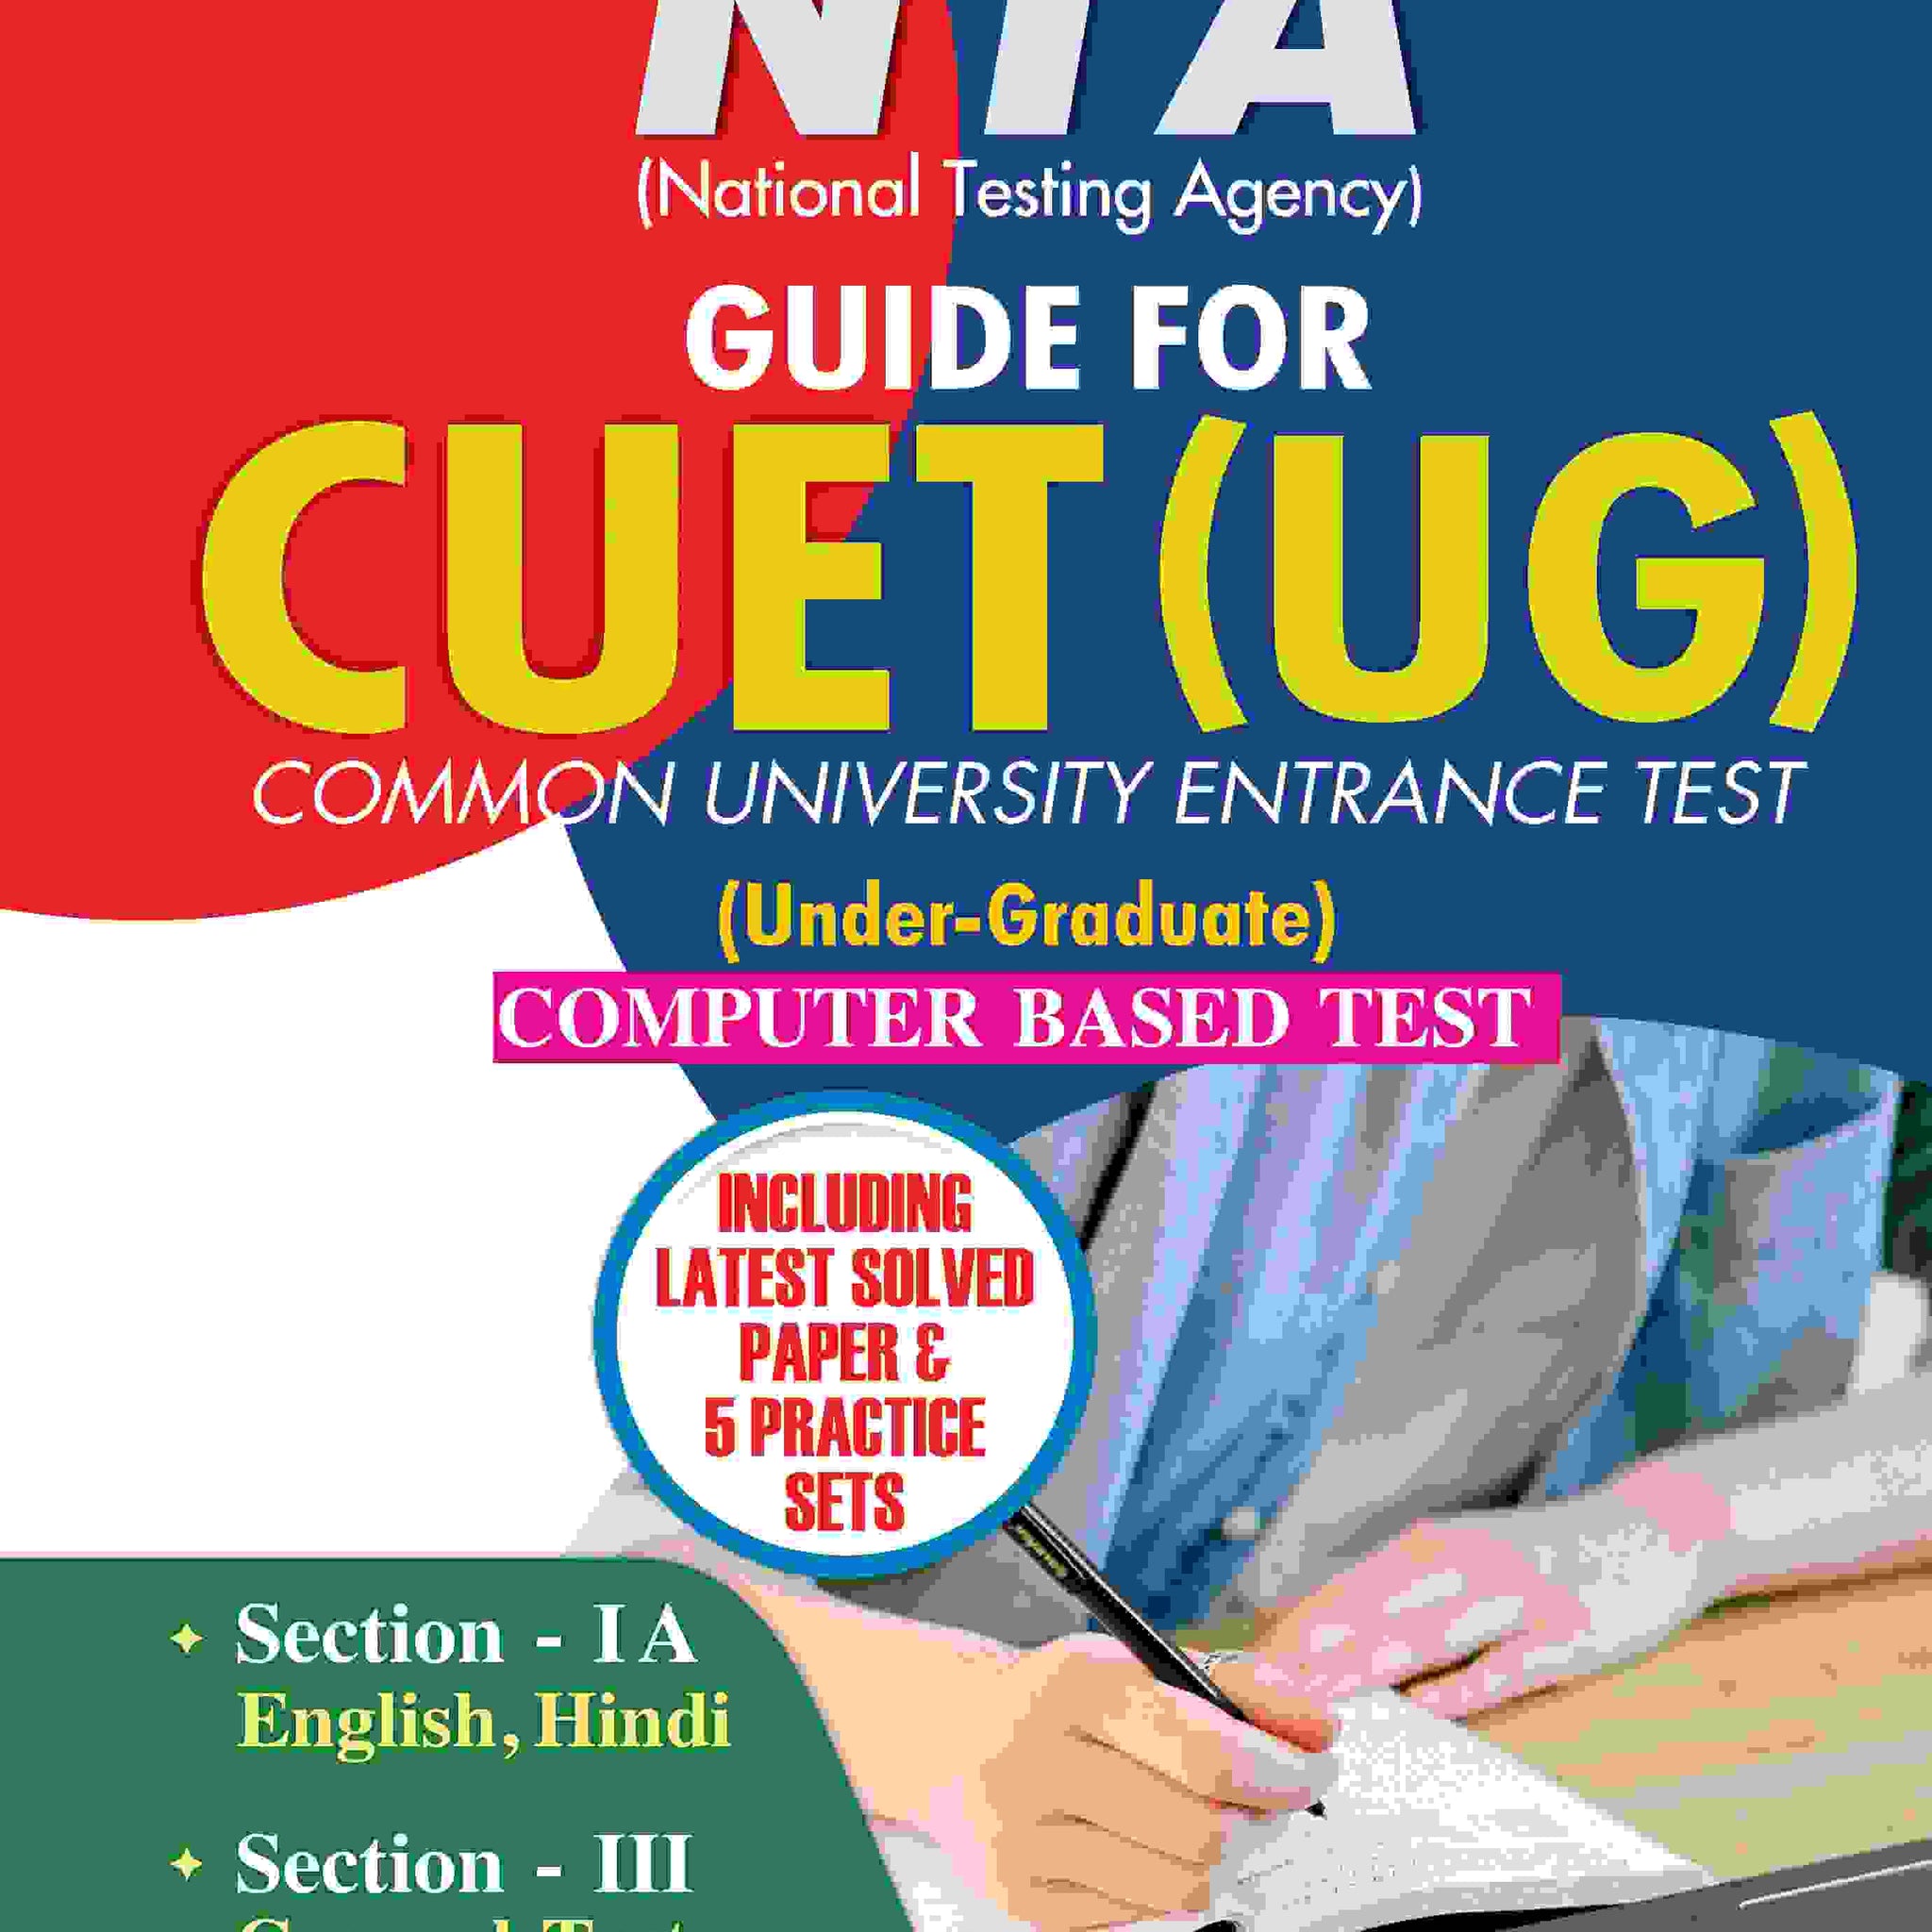 NTA (National Testing Agency) Guide For CUET (UG) Common University Entrance Test (Under-Graduate) Computer Based Test (English)